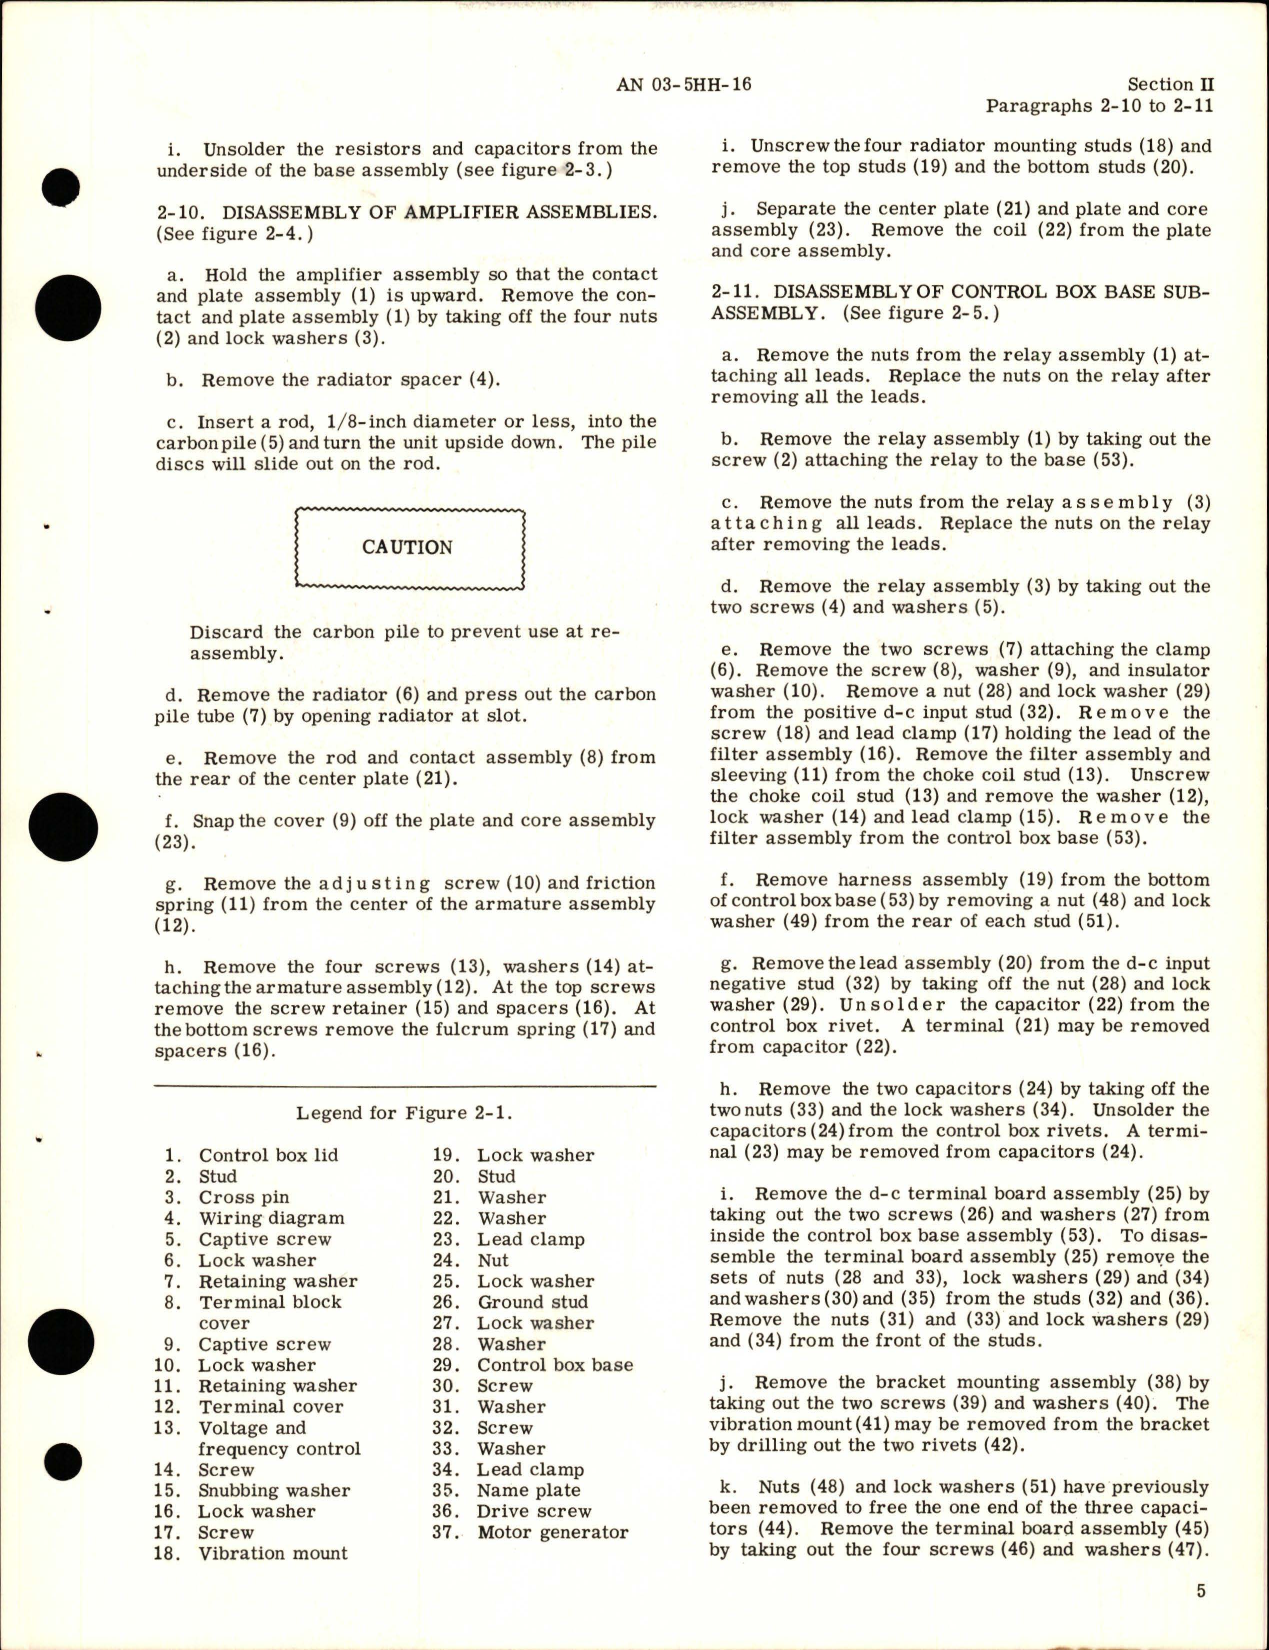 Sample page 9 from AirCorps Library document: Overhaul Instructions for Inverter - Parts SE-5-1 and SE-5-2